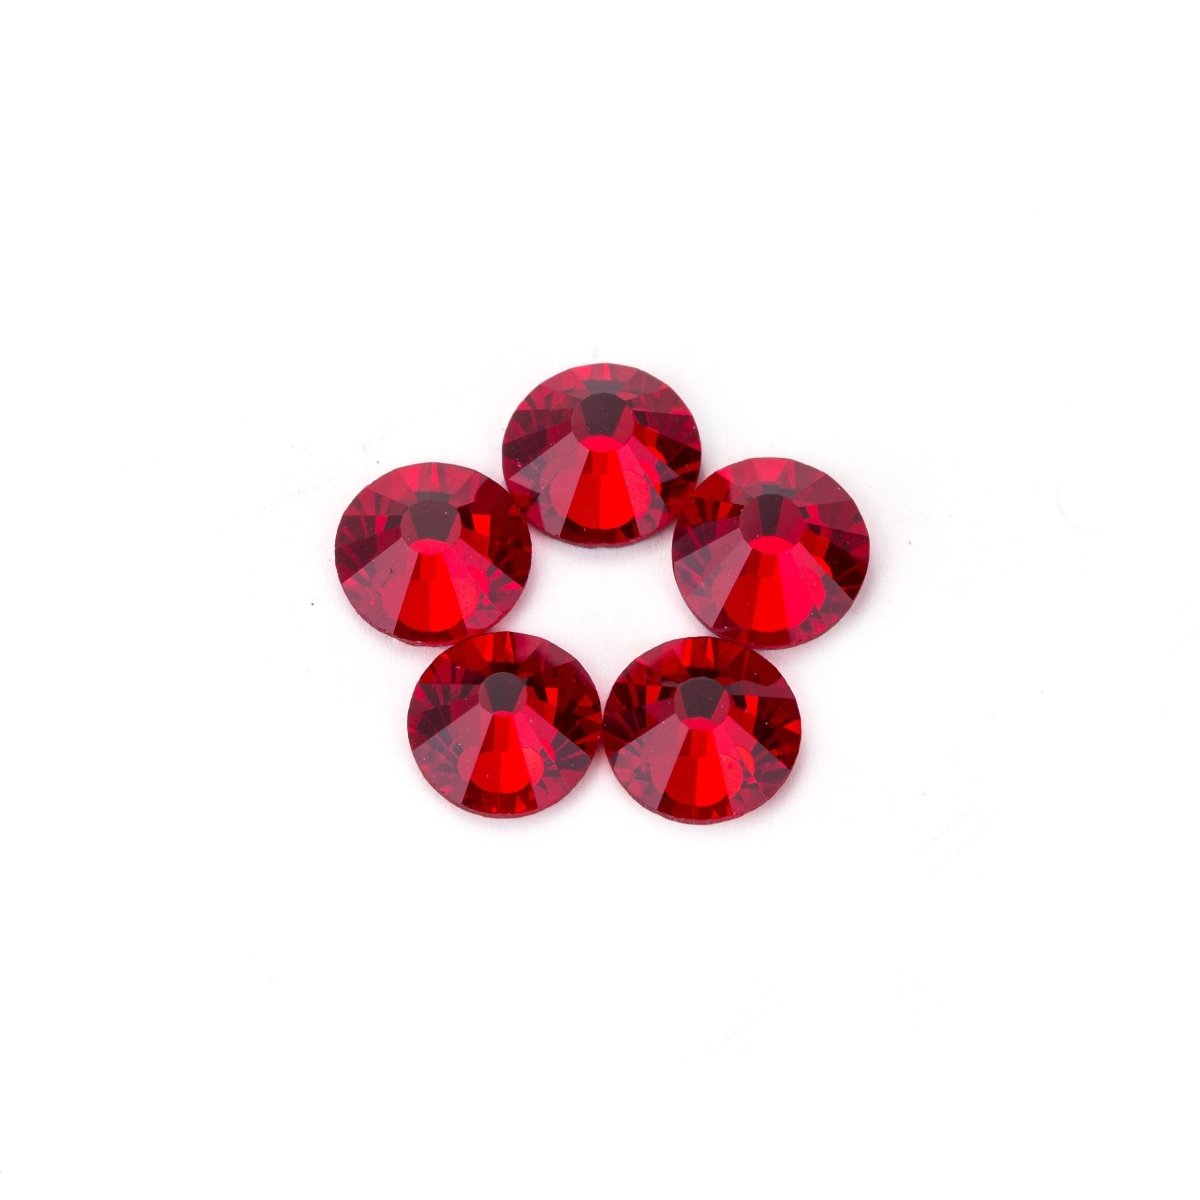 1440 pcs High Quality Crystal Bright Red Light Siam Rhinestones Loose Crystal flatback No Hot Fix glass bead Size ss 10/ ss 12 / ss16 / ss20 - DLUXCA